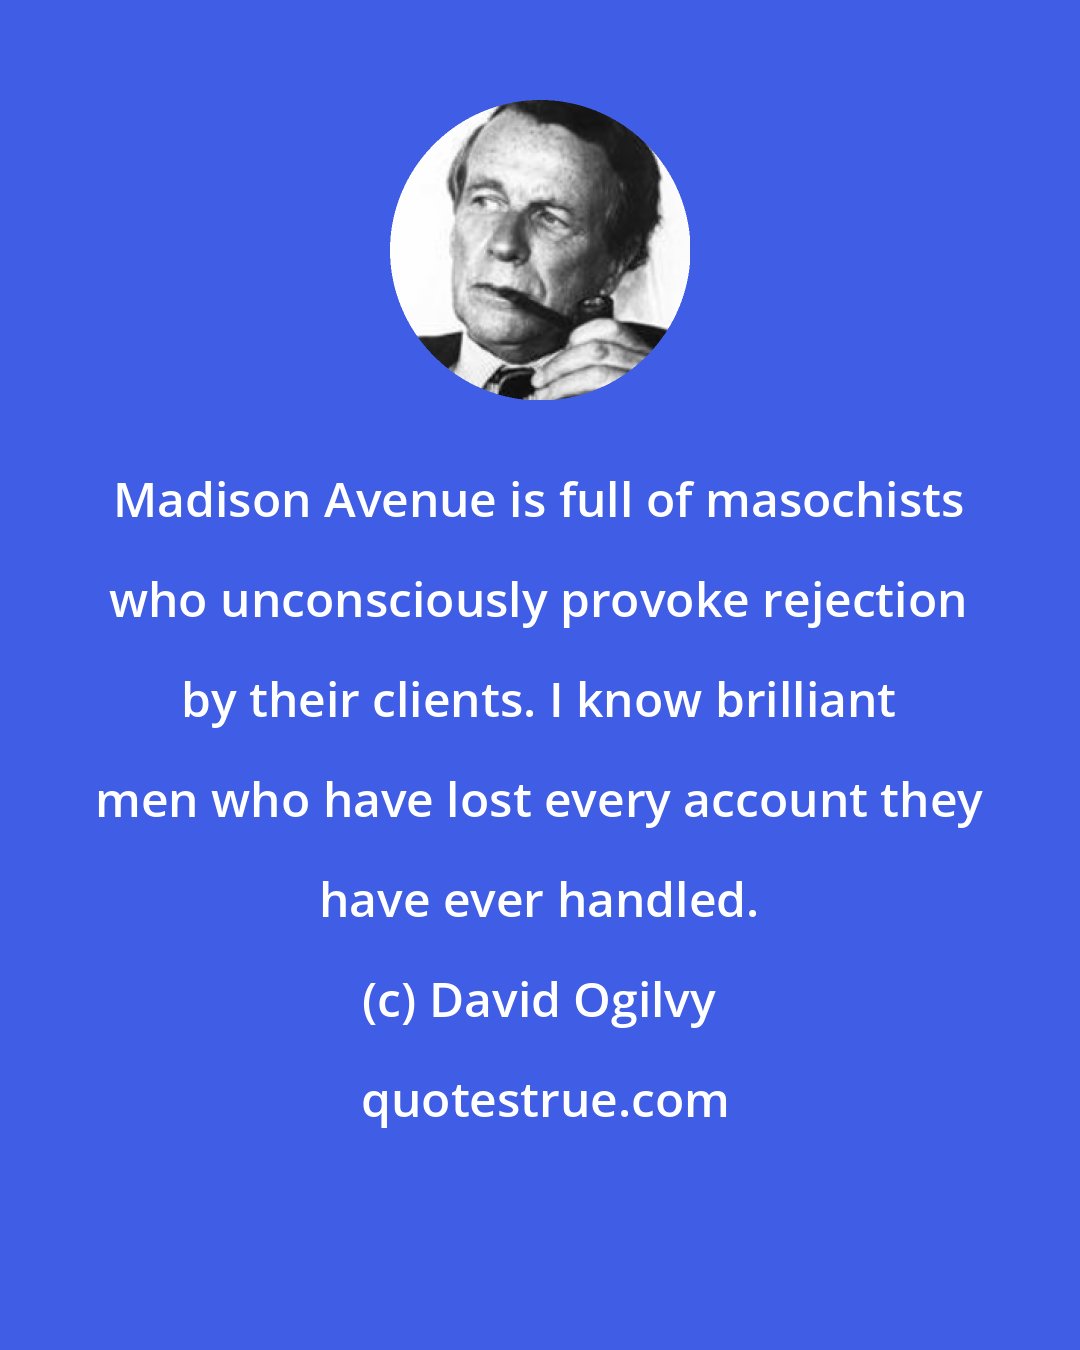 David Ogilvy: Madison Avenue is full of masochists who unconsciously provoke rejection by their clients. I know brilliant men who have lost every account they have ever handled.